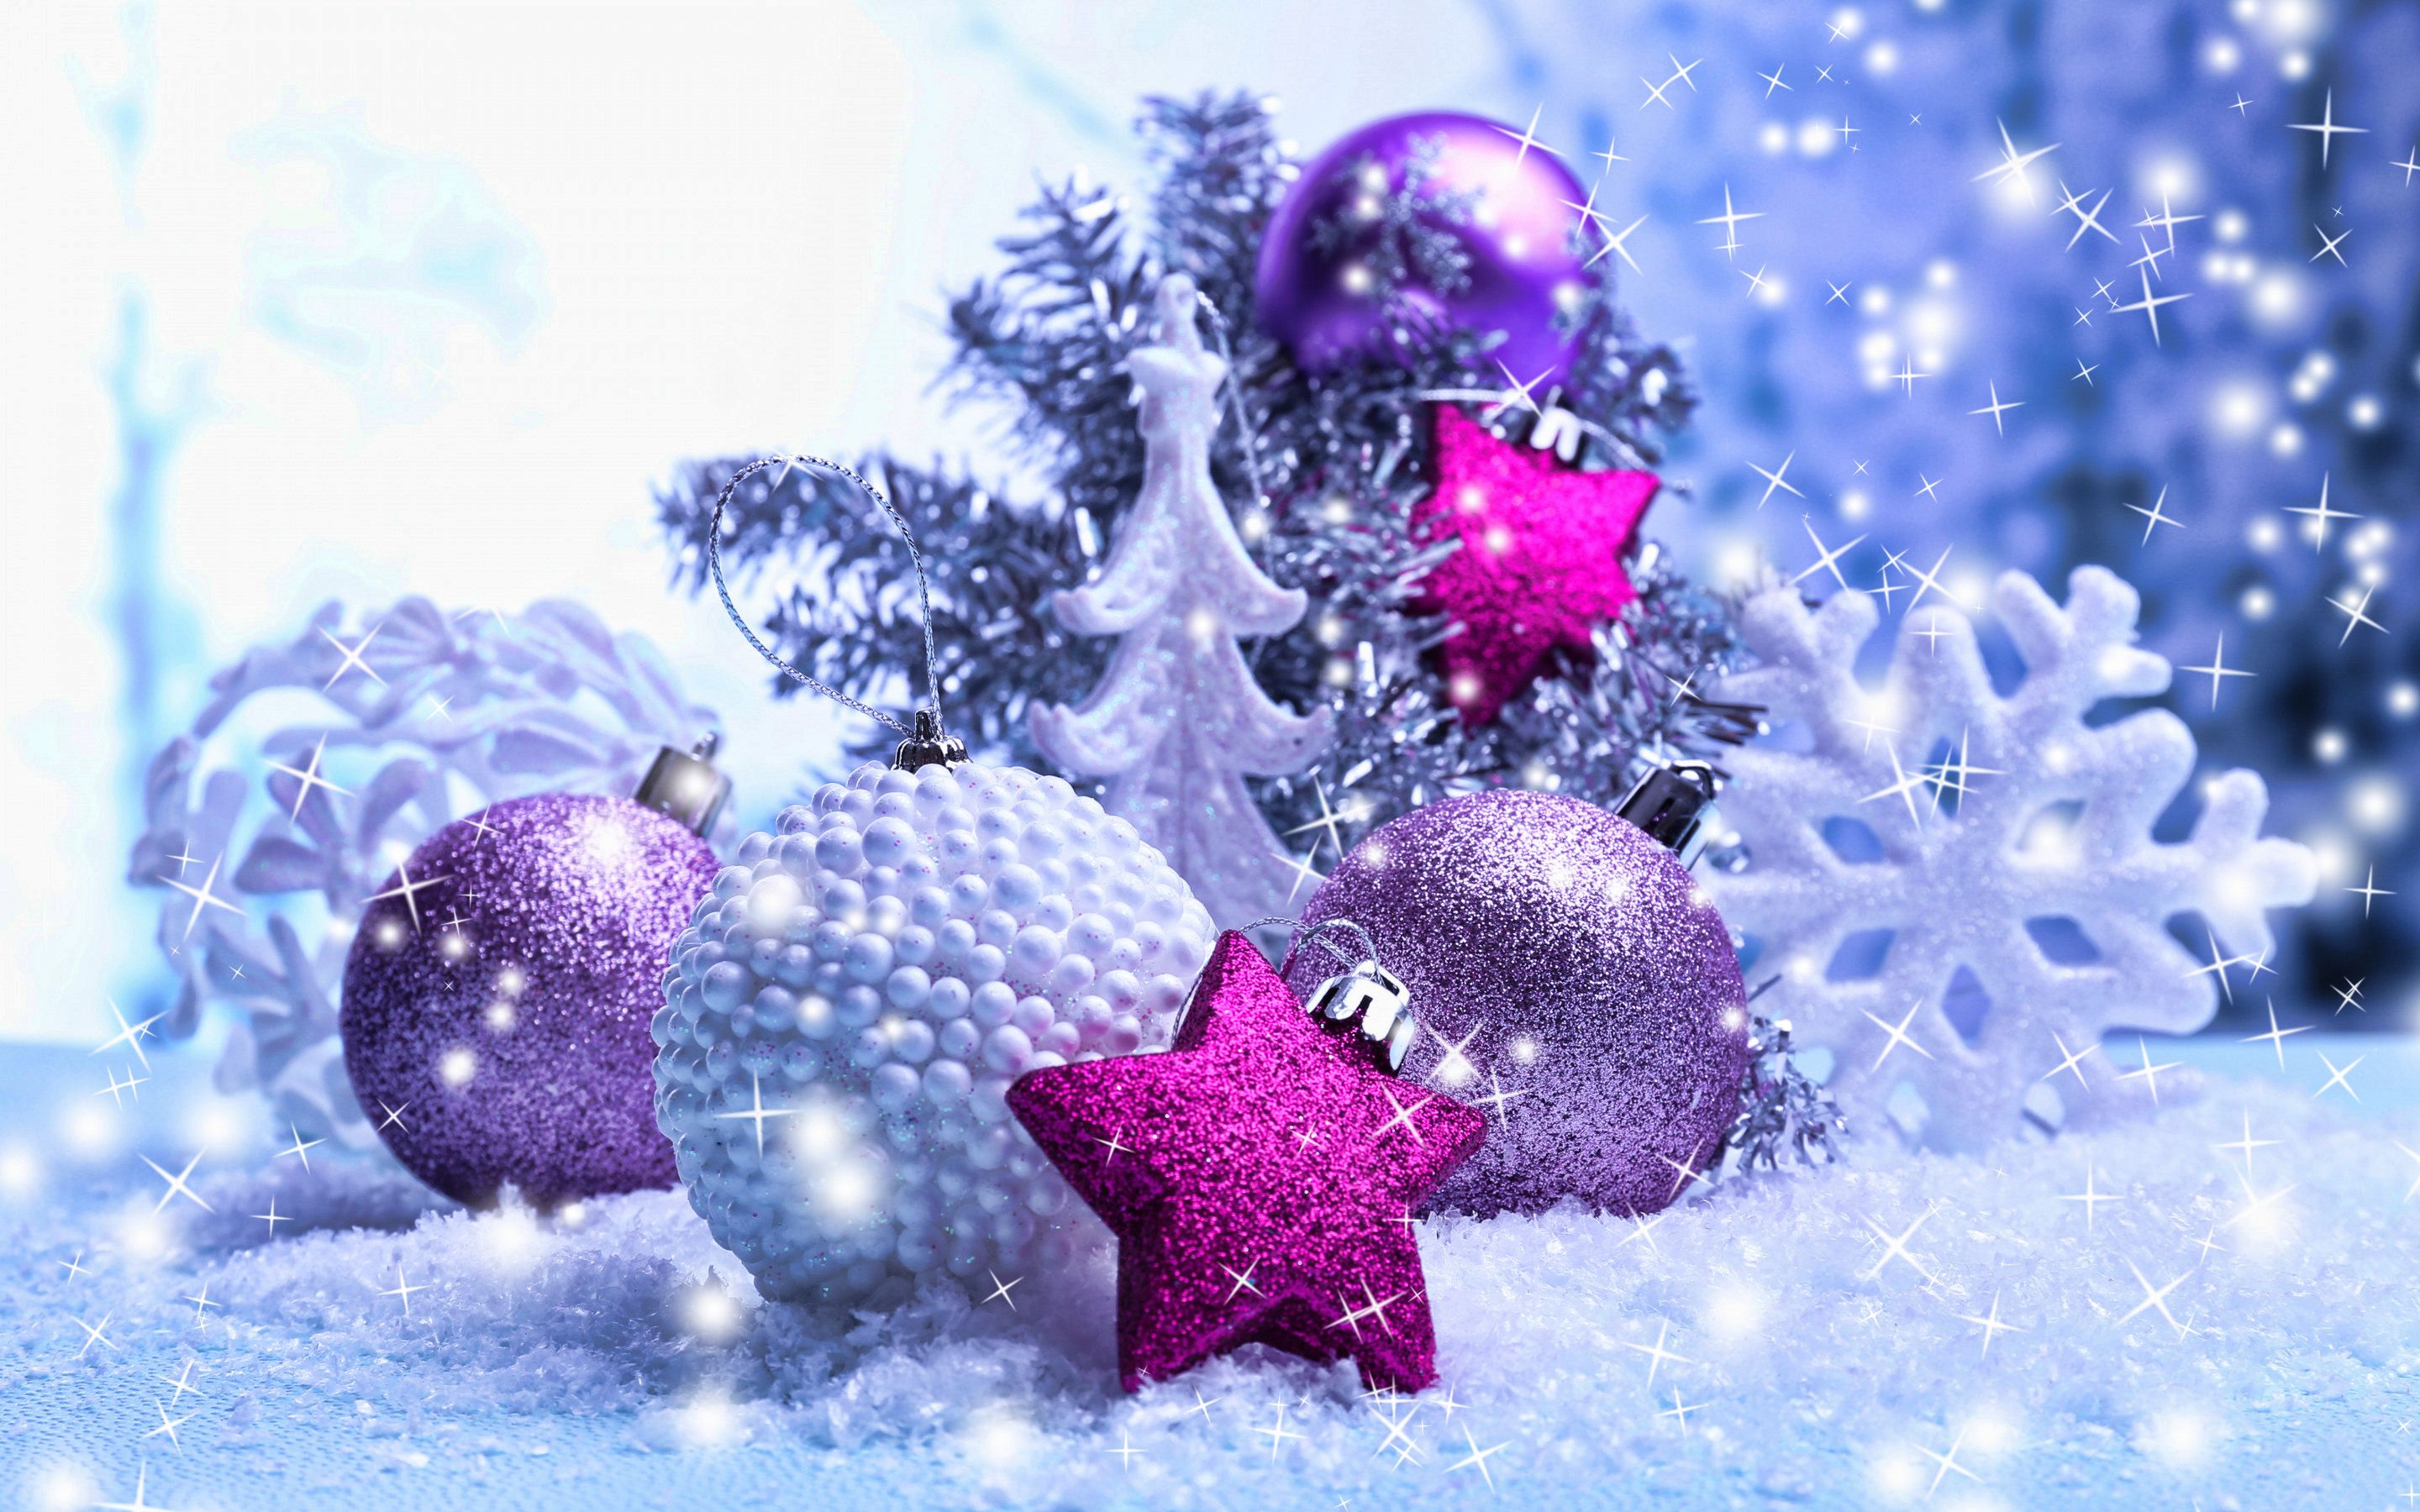 Download wallpaper Purple Xmas balls, xmas decorations, snowflakes, Merry Christmas, Happy New year, Christmas for desktop with resolution 2880x1800. High Quality HD picture wallpaper